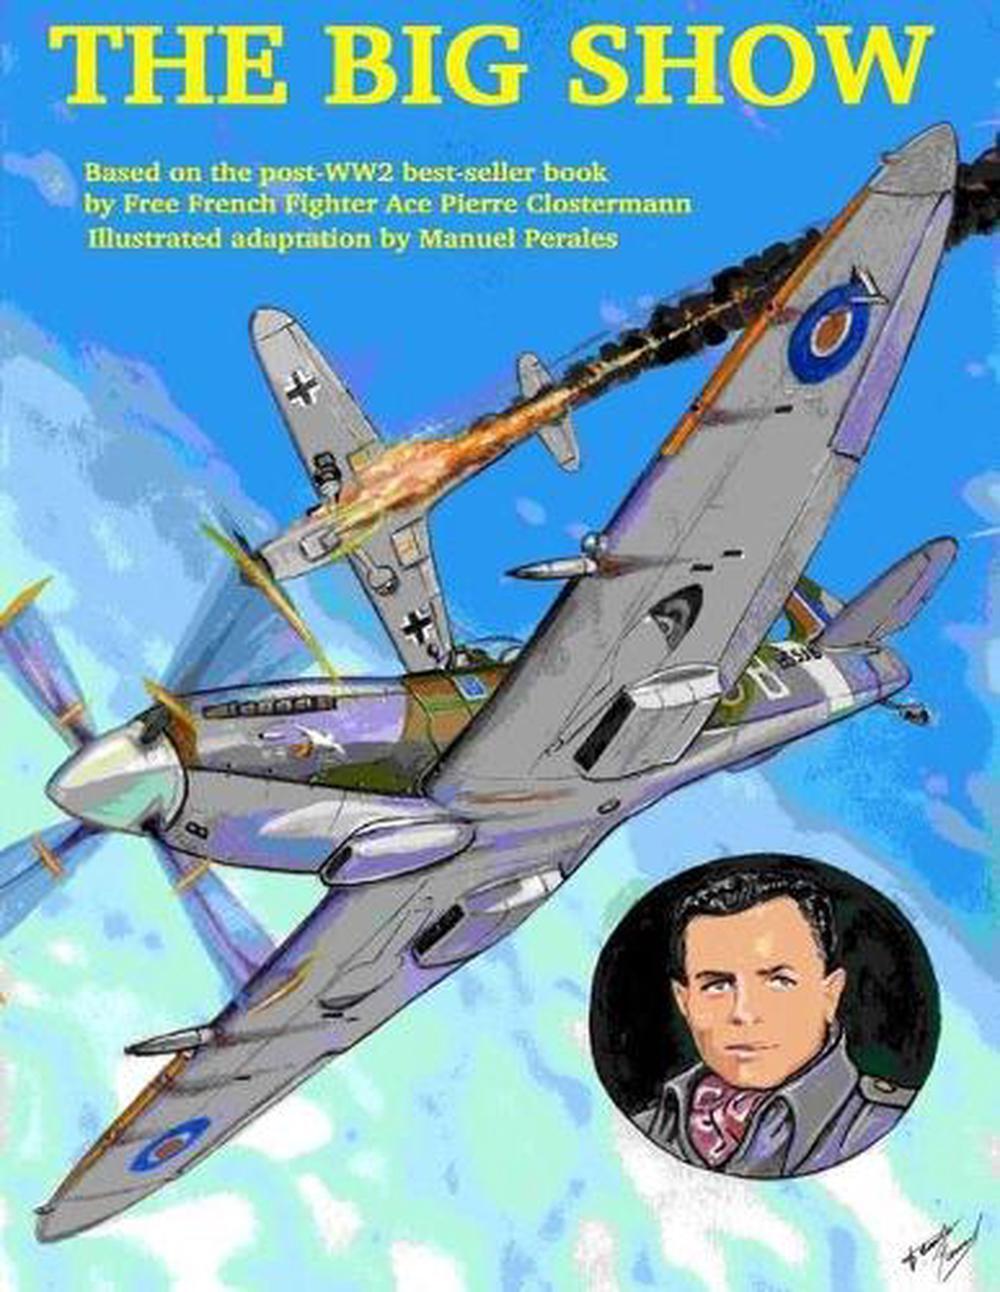 The Big Show Volume I: The story of a Free French R.A.F fighter pilot during WWI